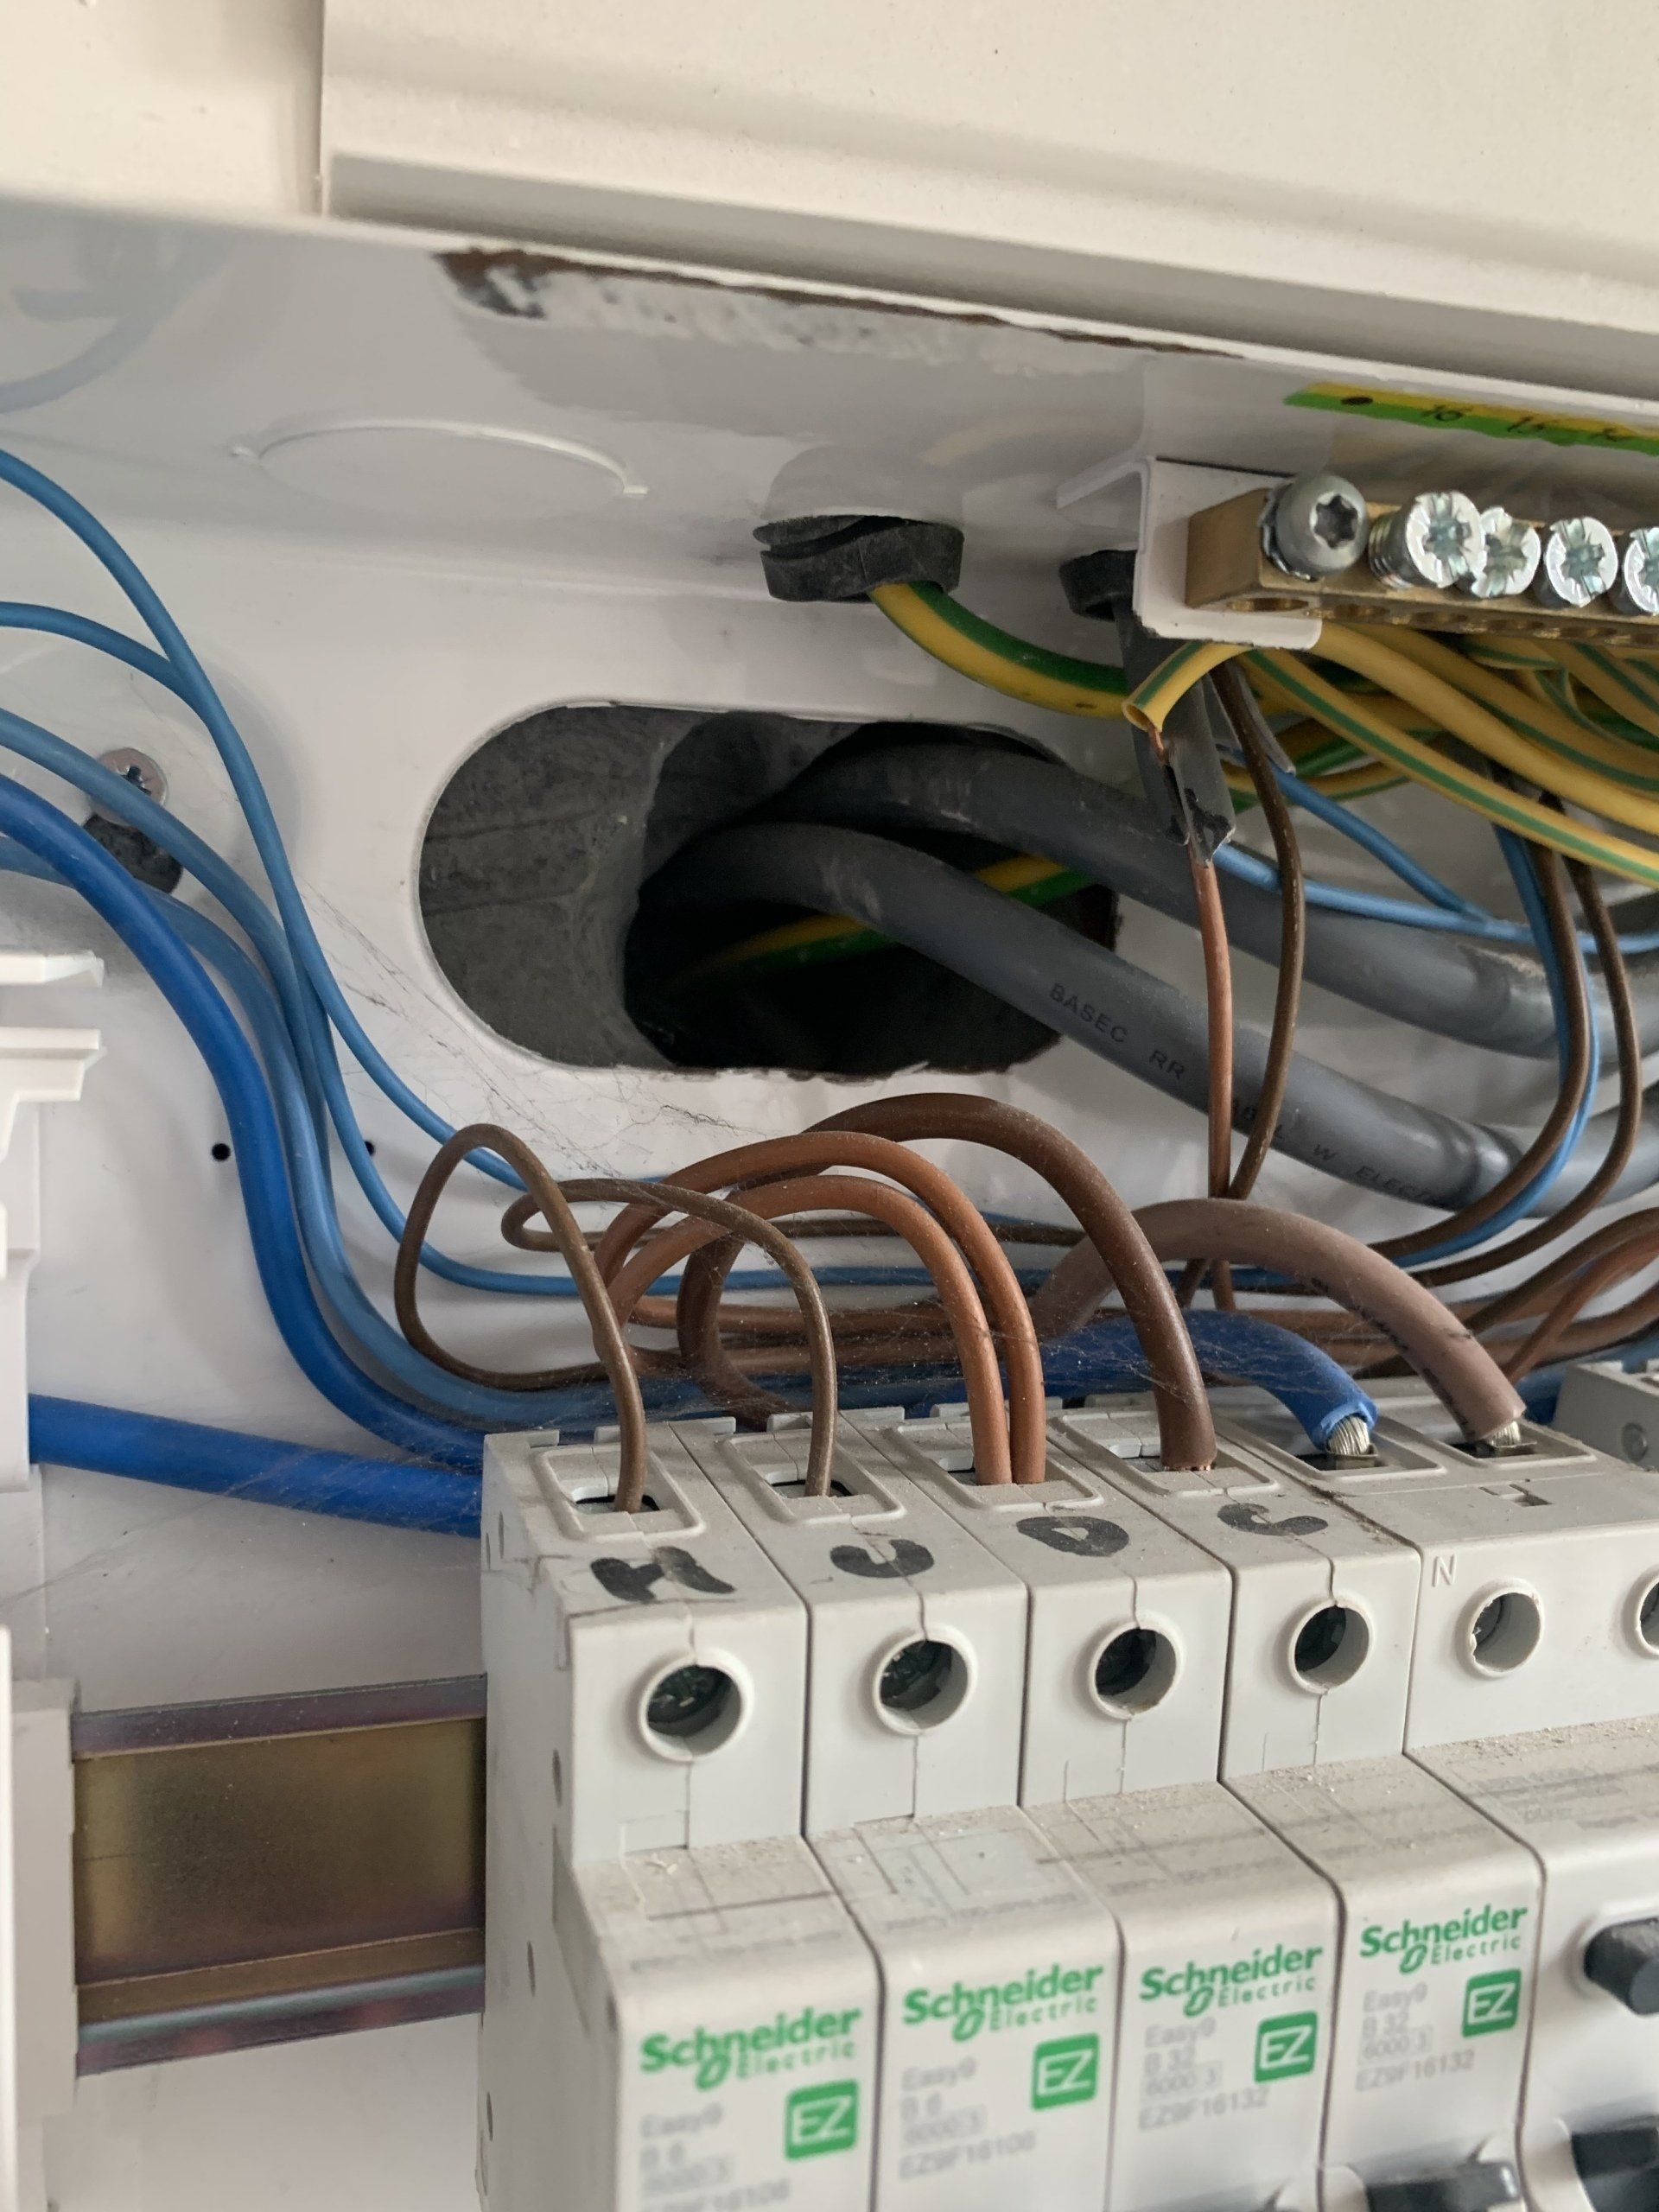 Emergency electricians near me, domestic electricians near me , recommended electricians, Eicr landlord inspections carried out by Electrician4you in newton le willows